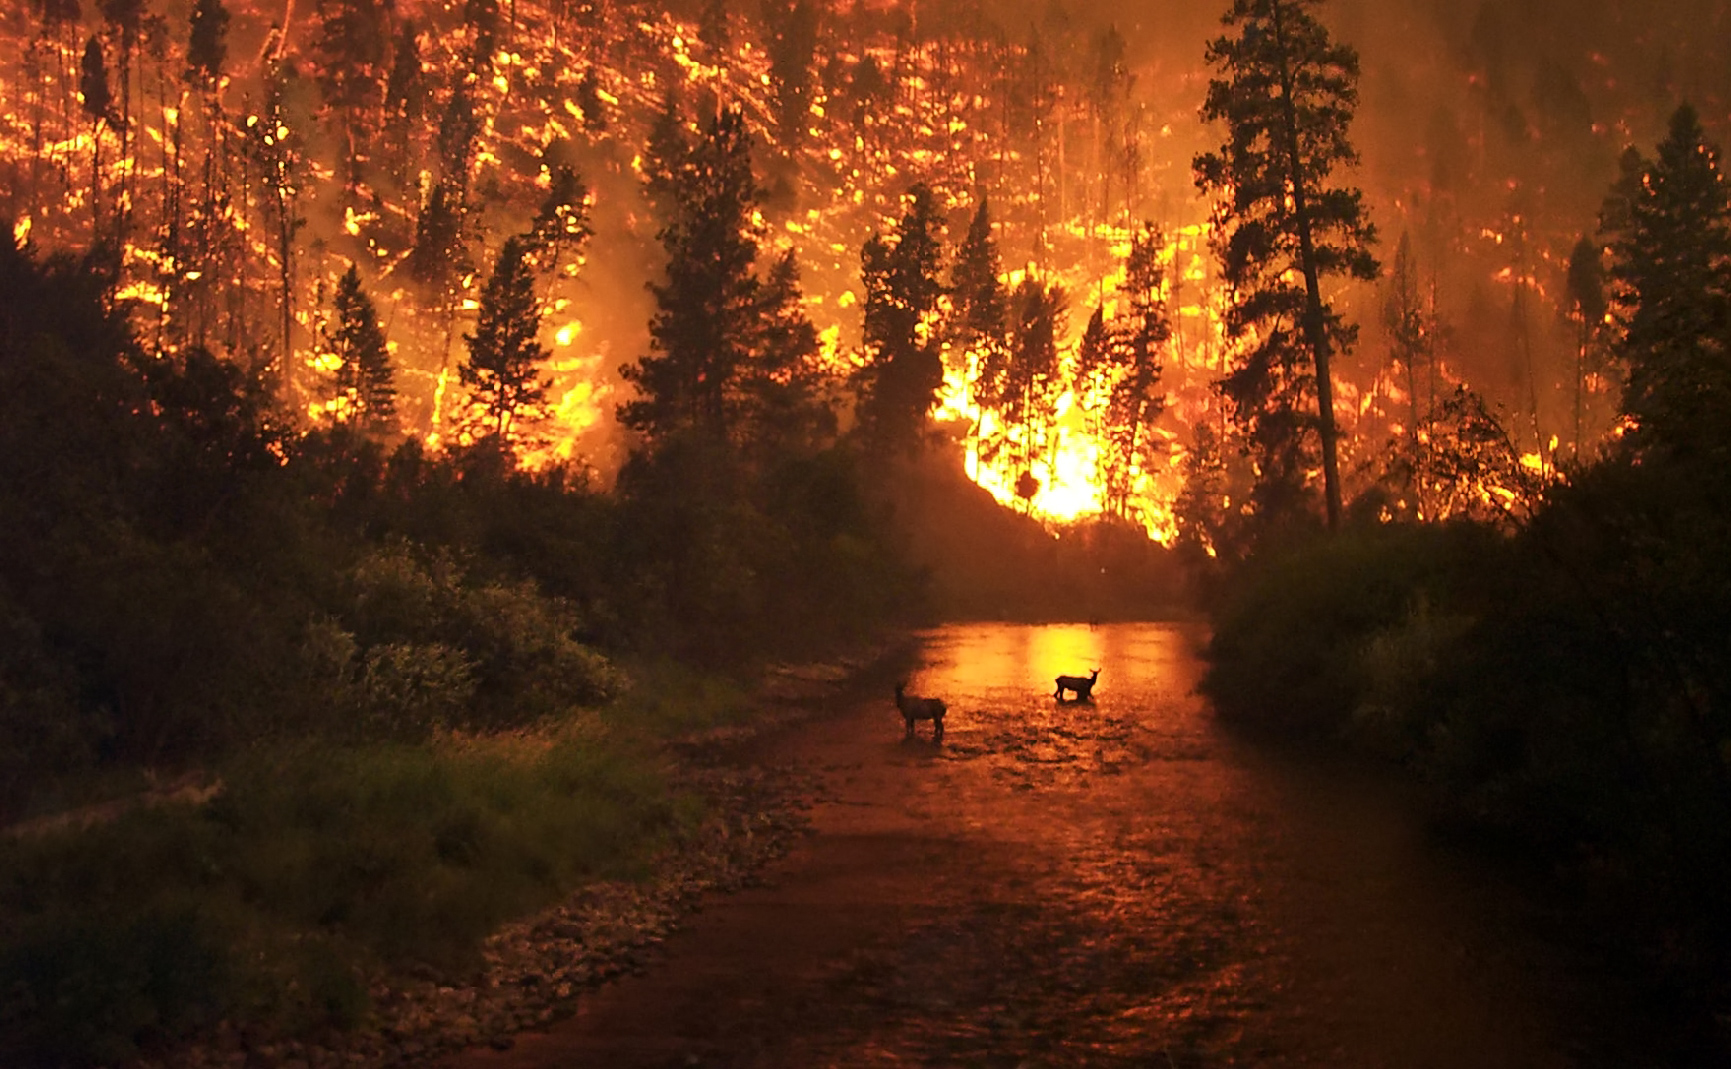 A wildfire in the Bitterroot National Forest in Montana, United States. Two elk stand in a stream with a hillside on fire in the background.